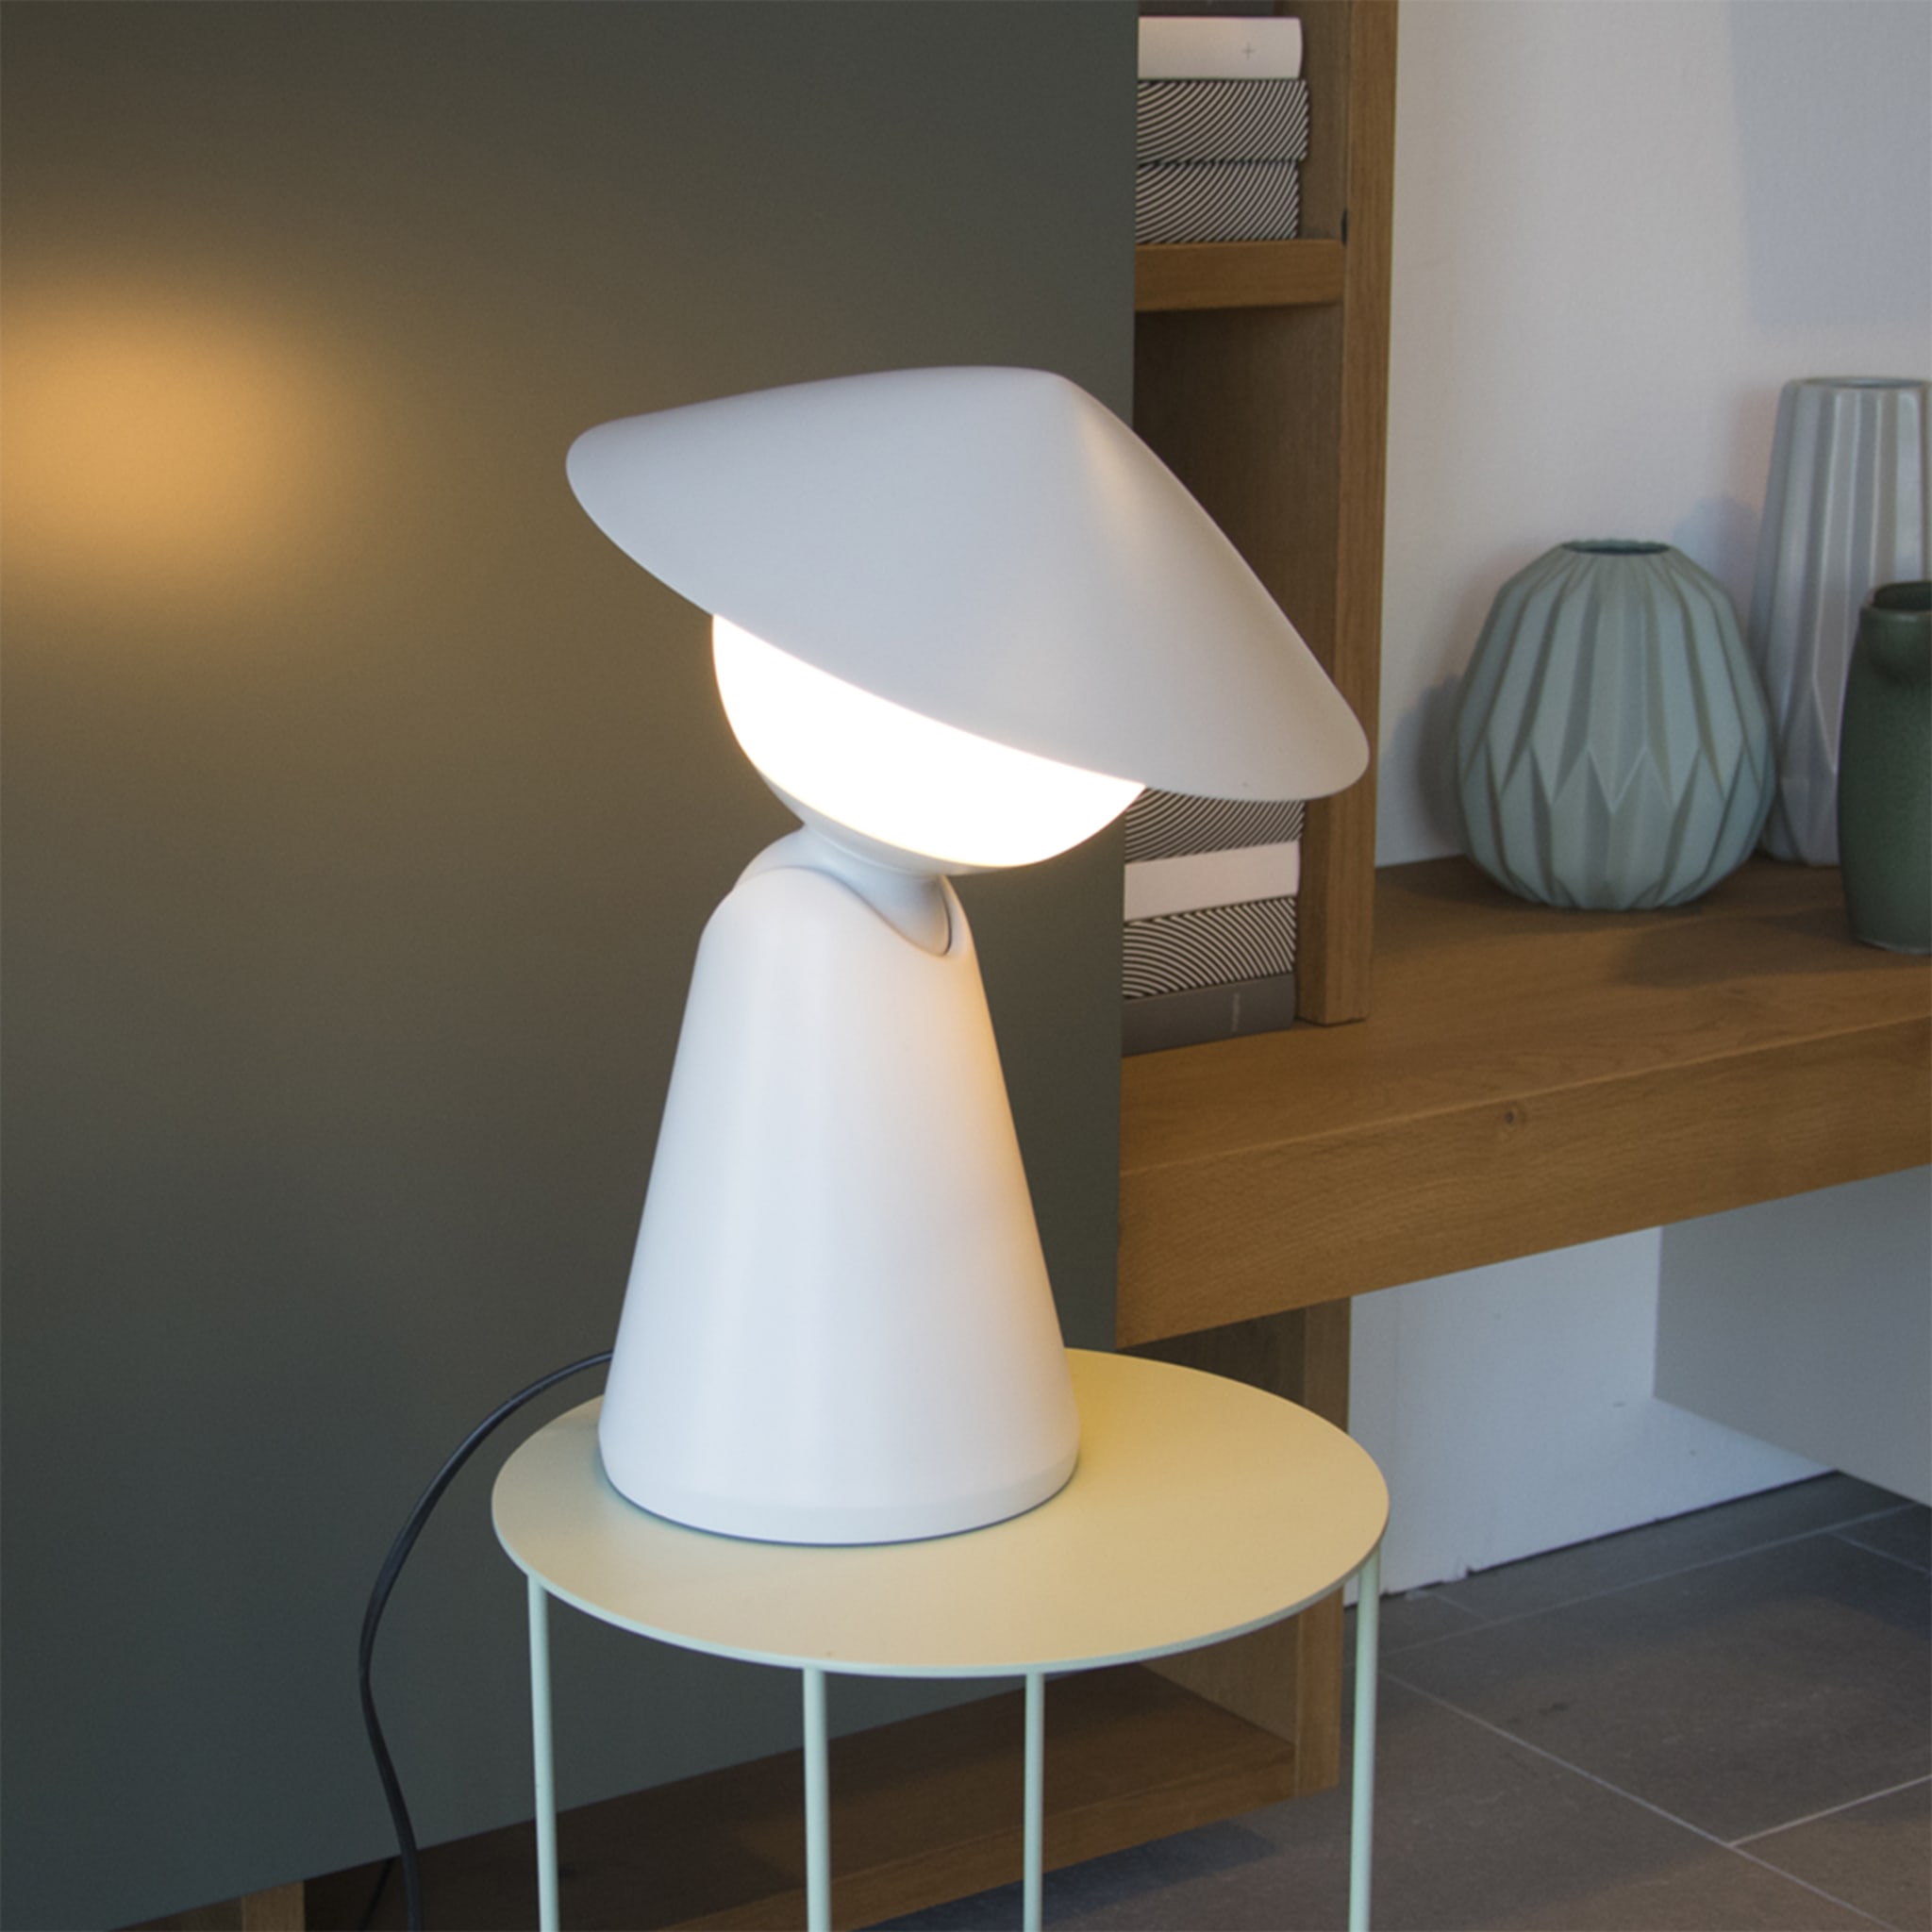 Puddy Gray Table Lamp by Albore Design - Alternative view 4